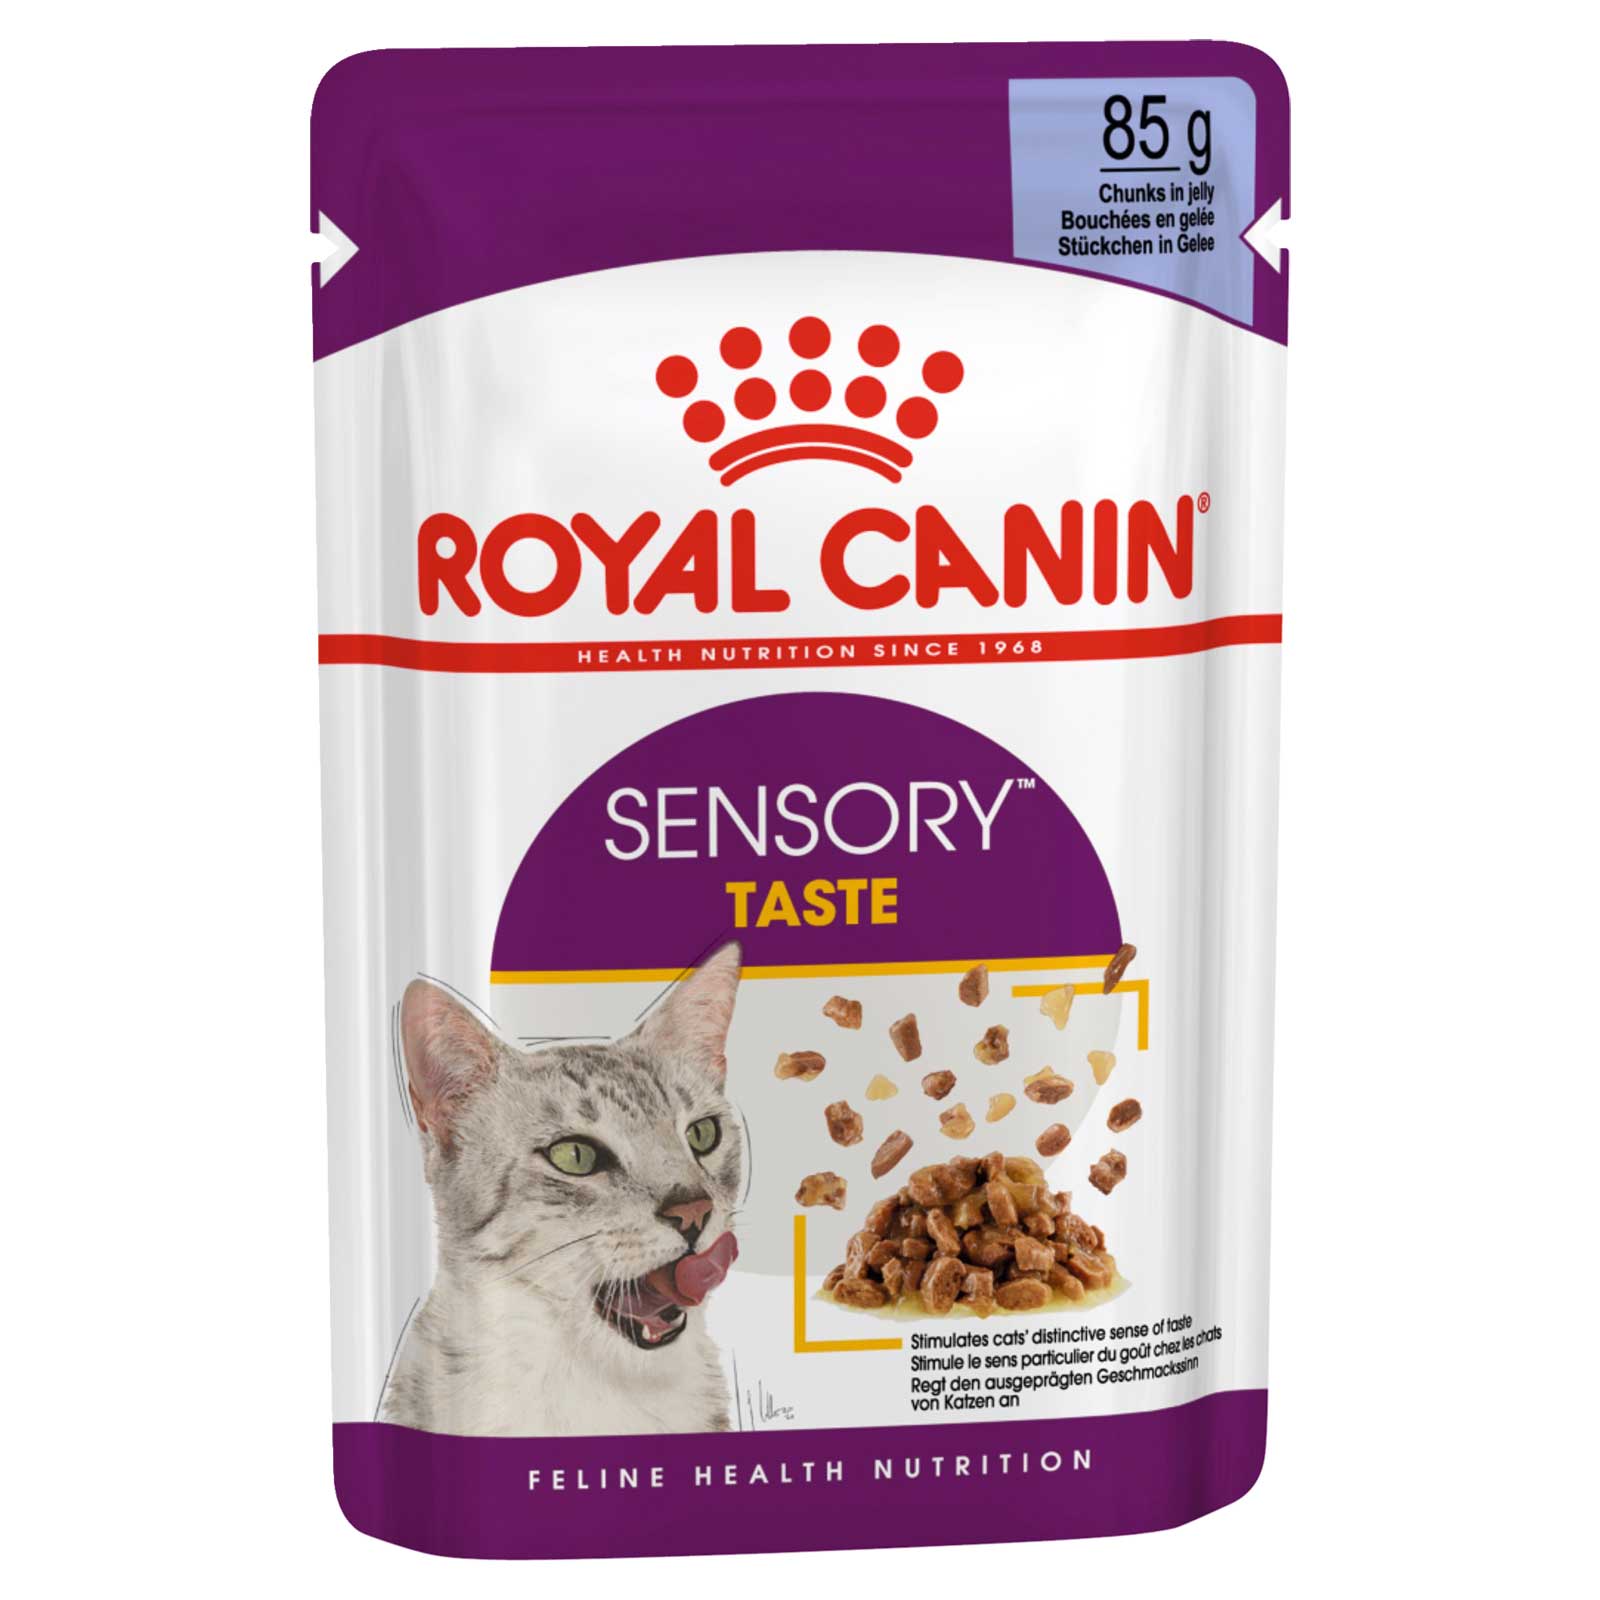 Royal Canin Cat Food Pouch Adult Sensory Taste Jelly